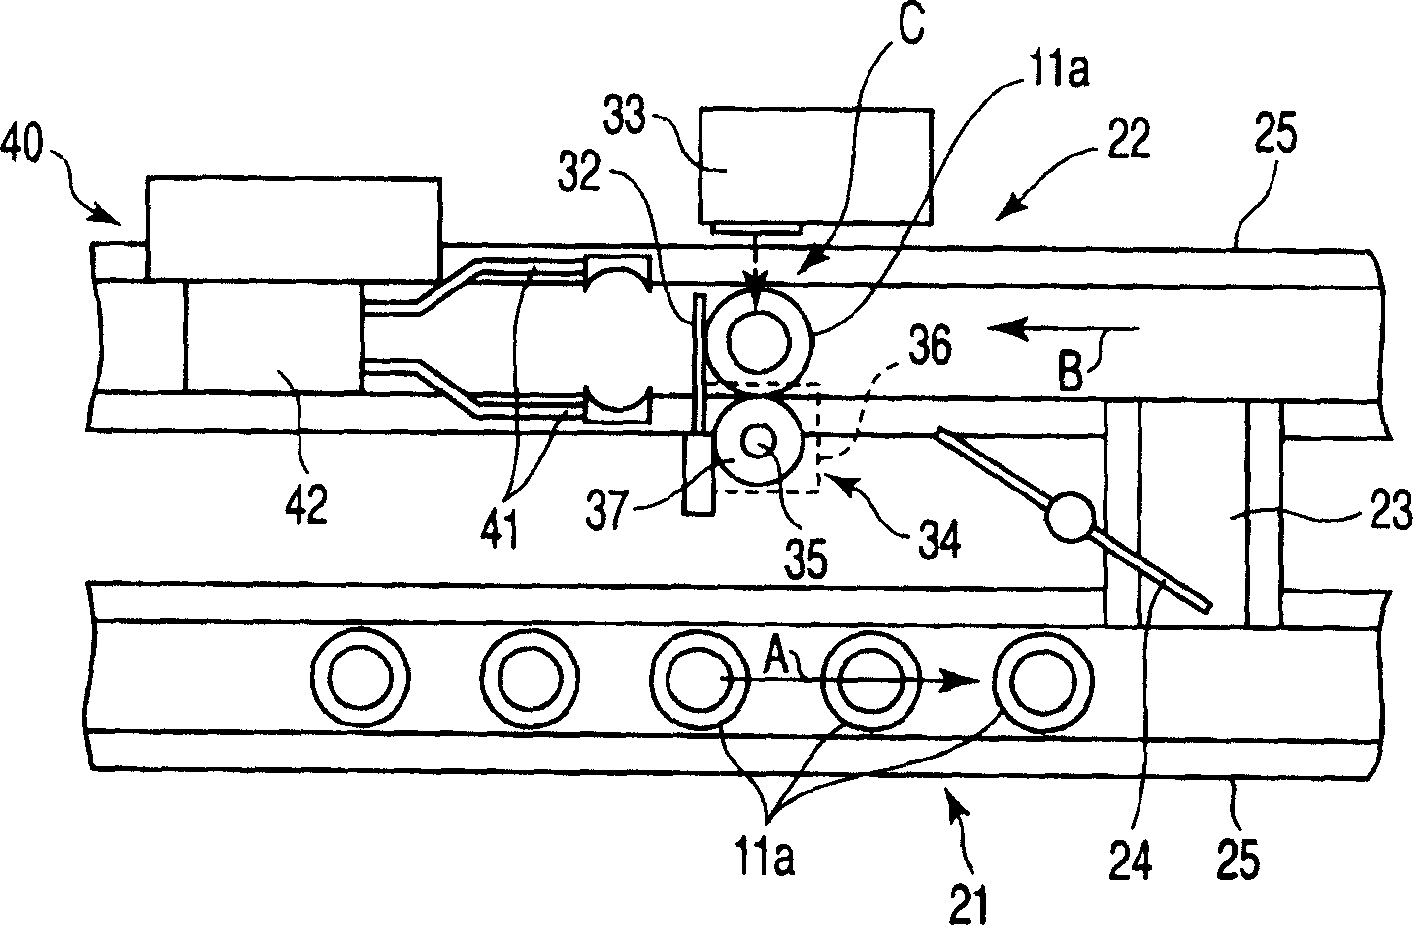 Bar-code reading device having a mechanism for pulling up test tubes from holders